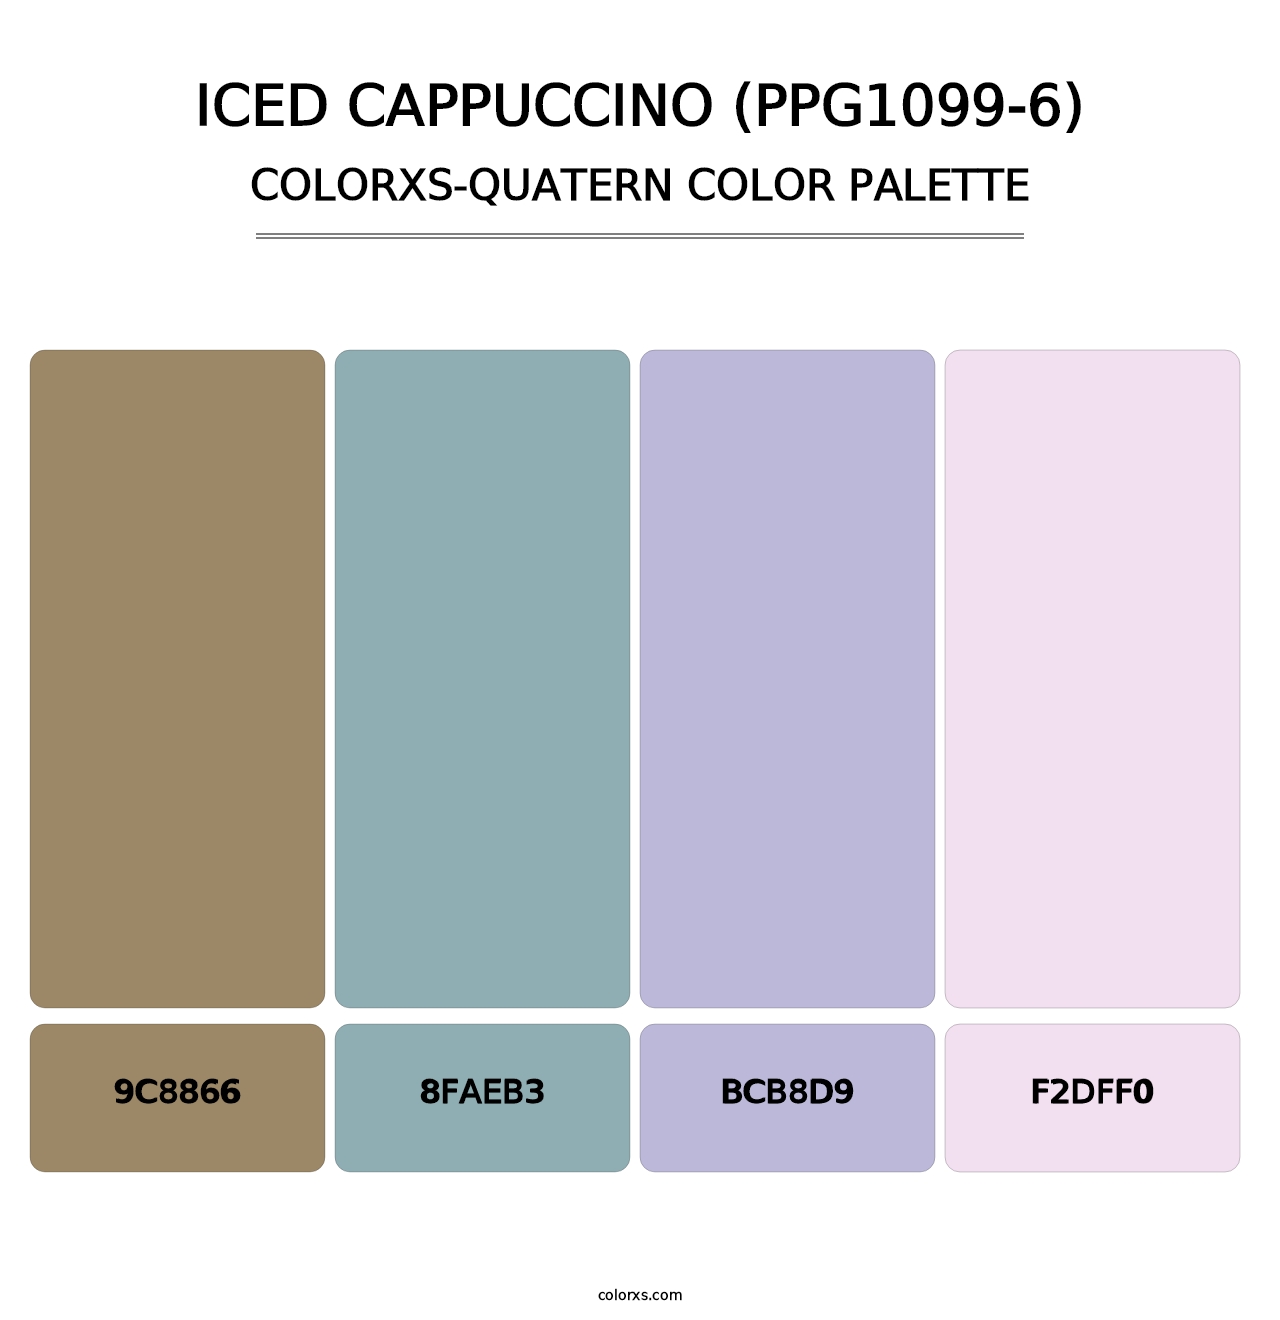 Iced Cappuccino (PPG1099-6) - Colorxs Quatern Palette